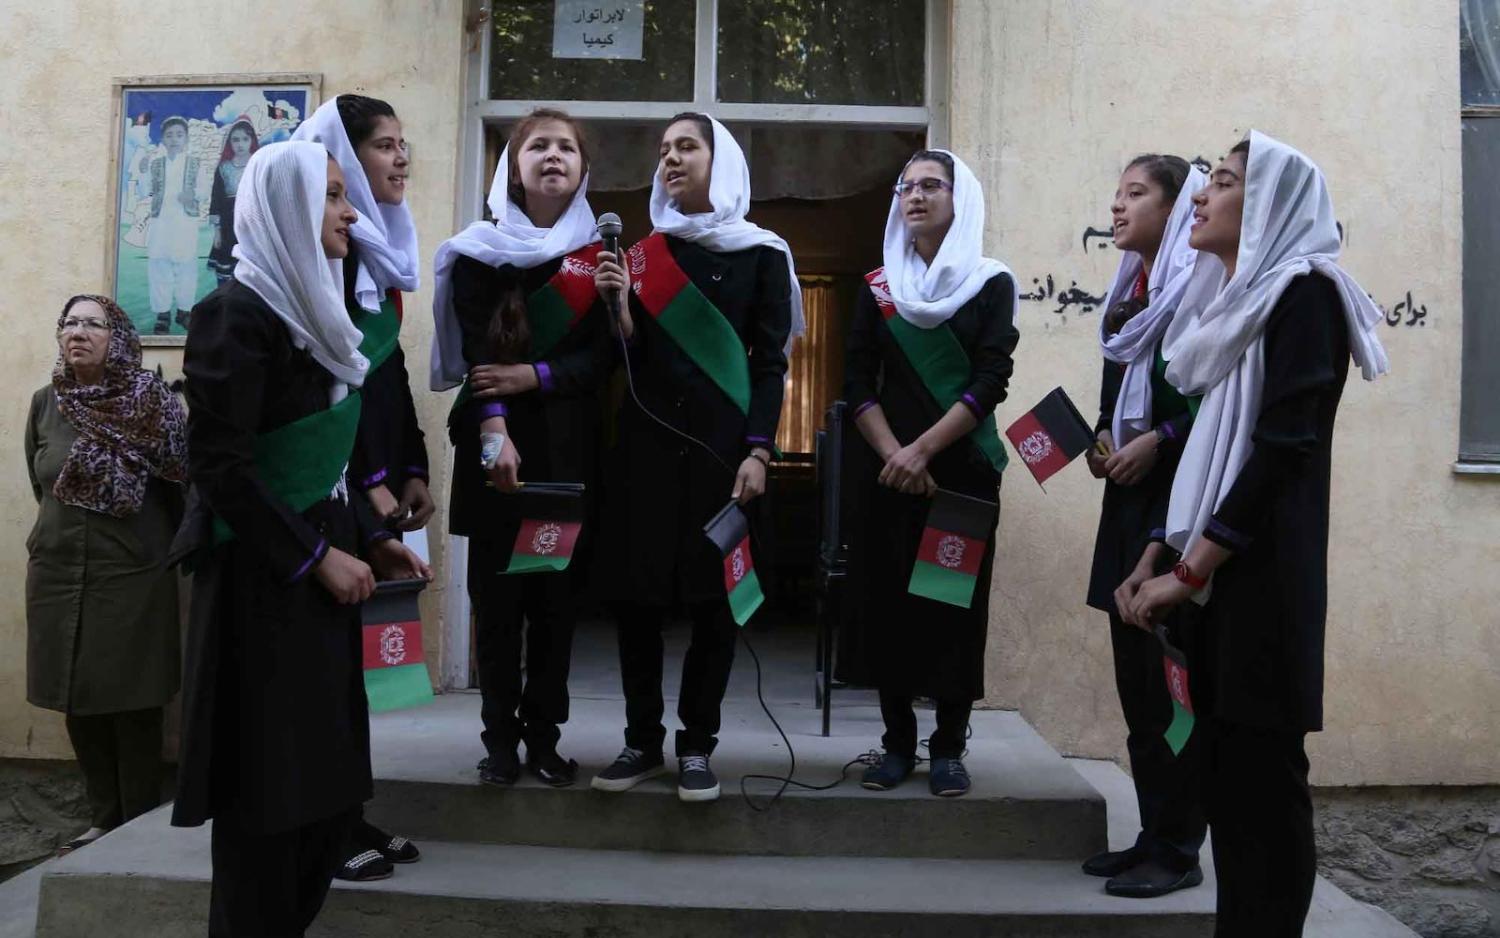 Afghan girl students sing the national anthem before classes at Surya High School in Kabul, September 2016 (Xinhua/Rahmat Alizadah via Getty Images)